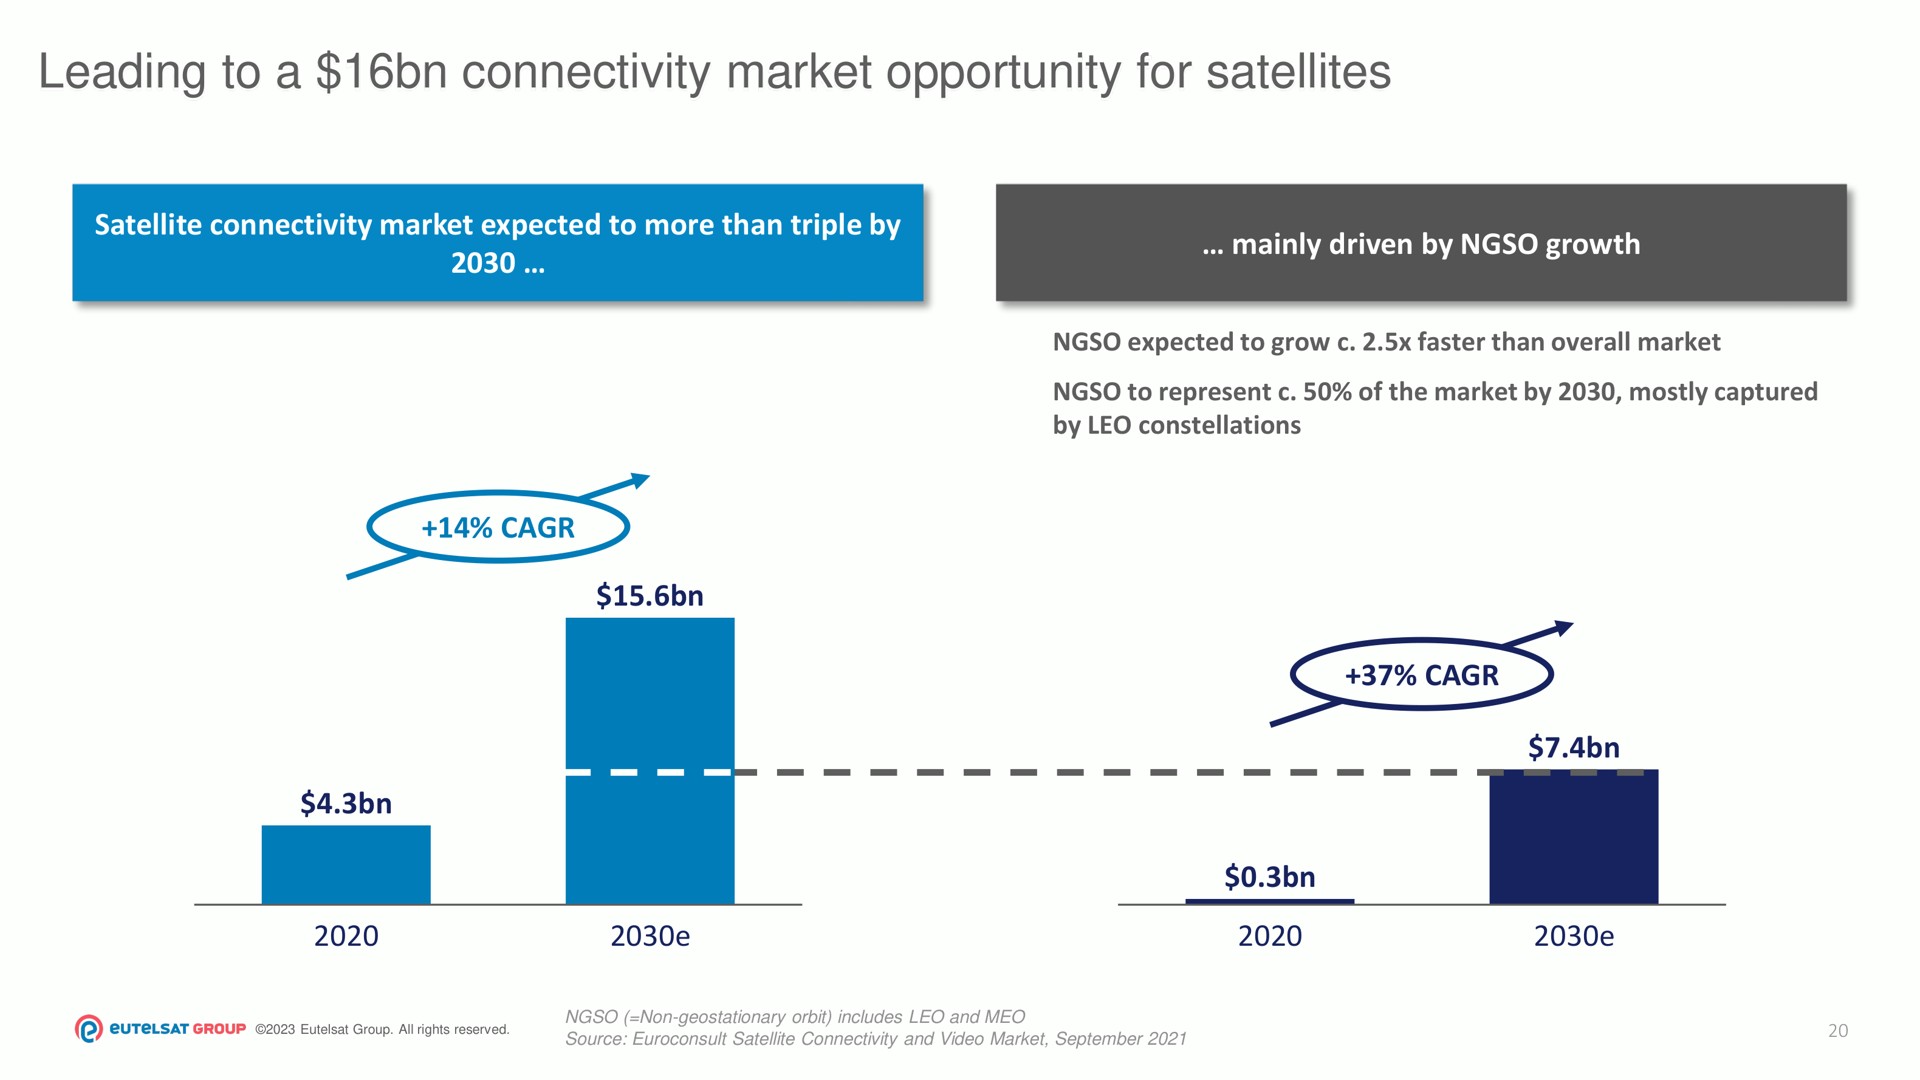 leading to a connectivity market opportunity for satellites | Eutelsat